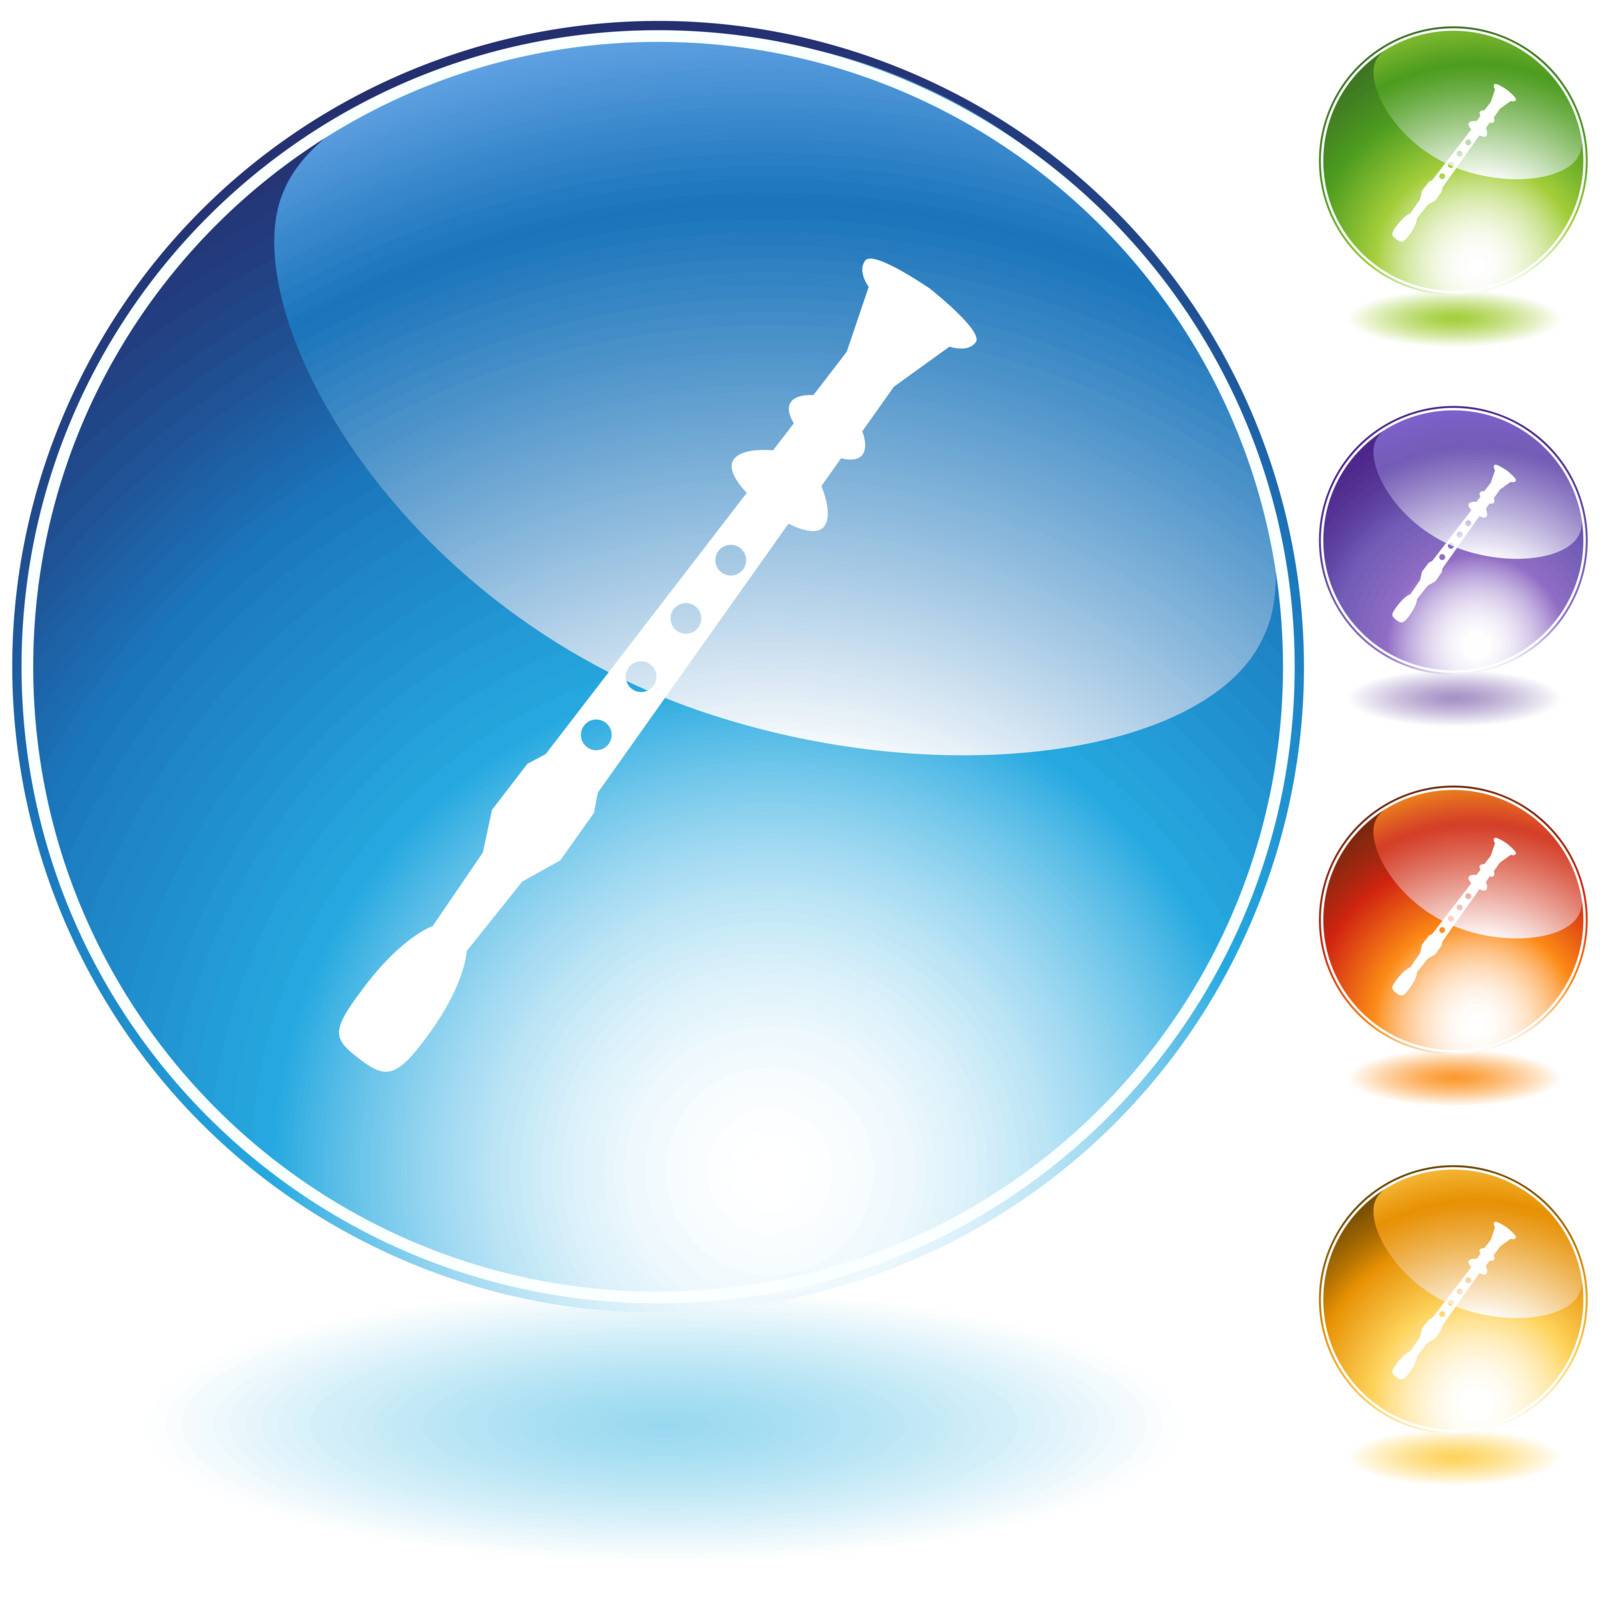 Recorder flute music instrument isolated on a white background.